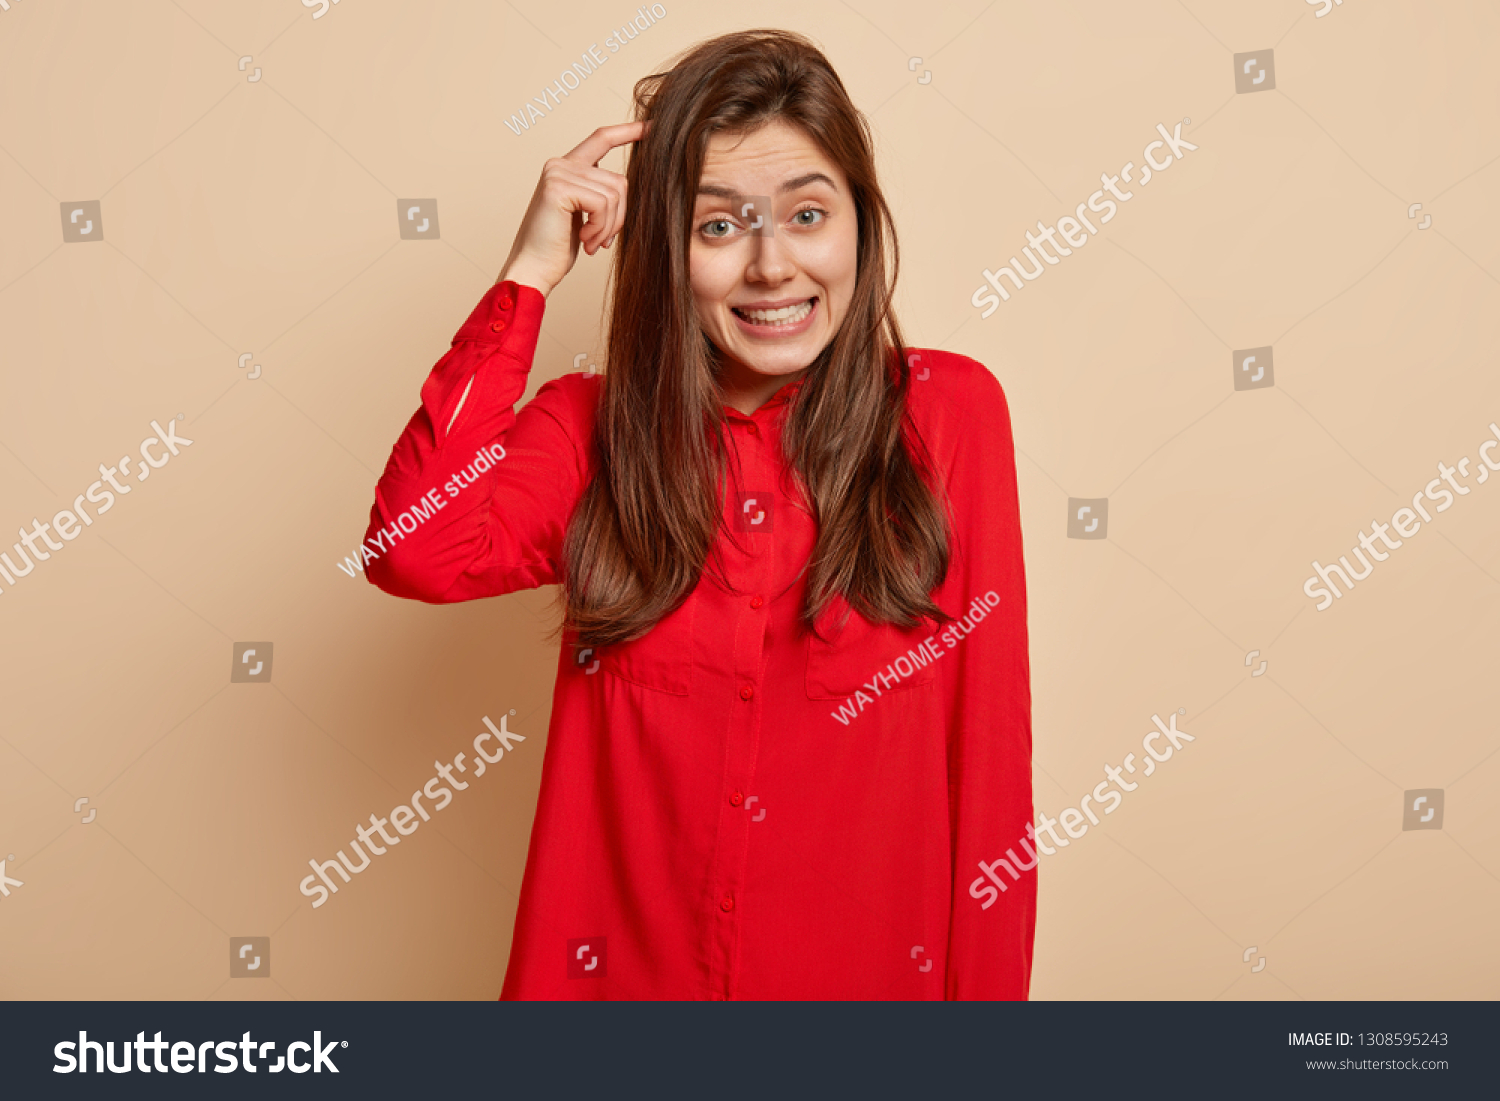 Puzzled unsure delighted young woman scratches head and looks directly at camera, makes decision, recieves good proposal, wears red shirt, poses over light beige background, uses imagination #1308595243